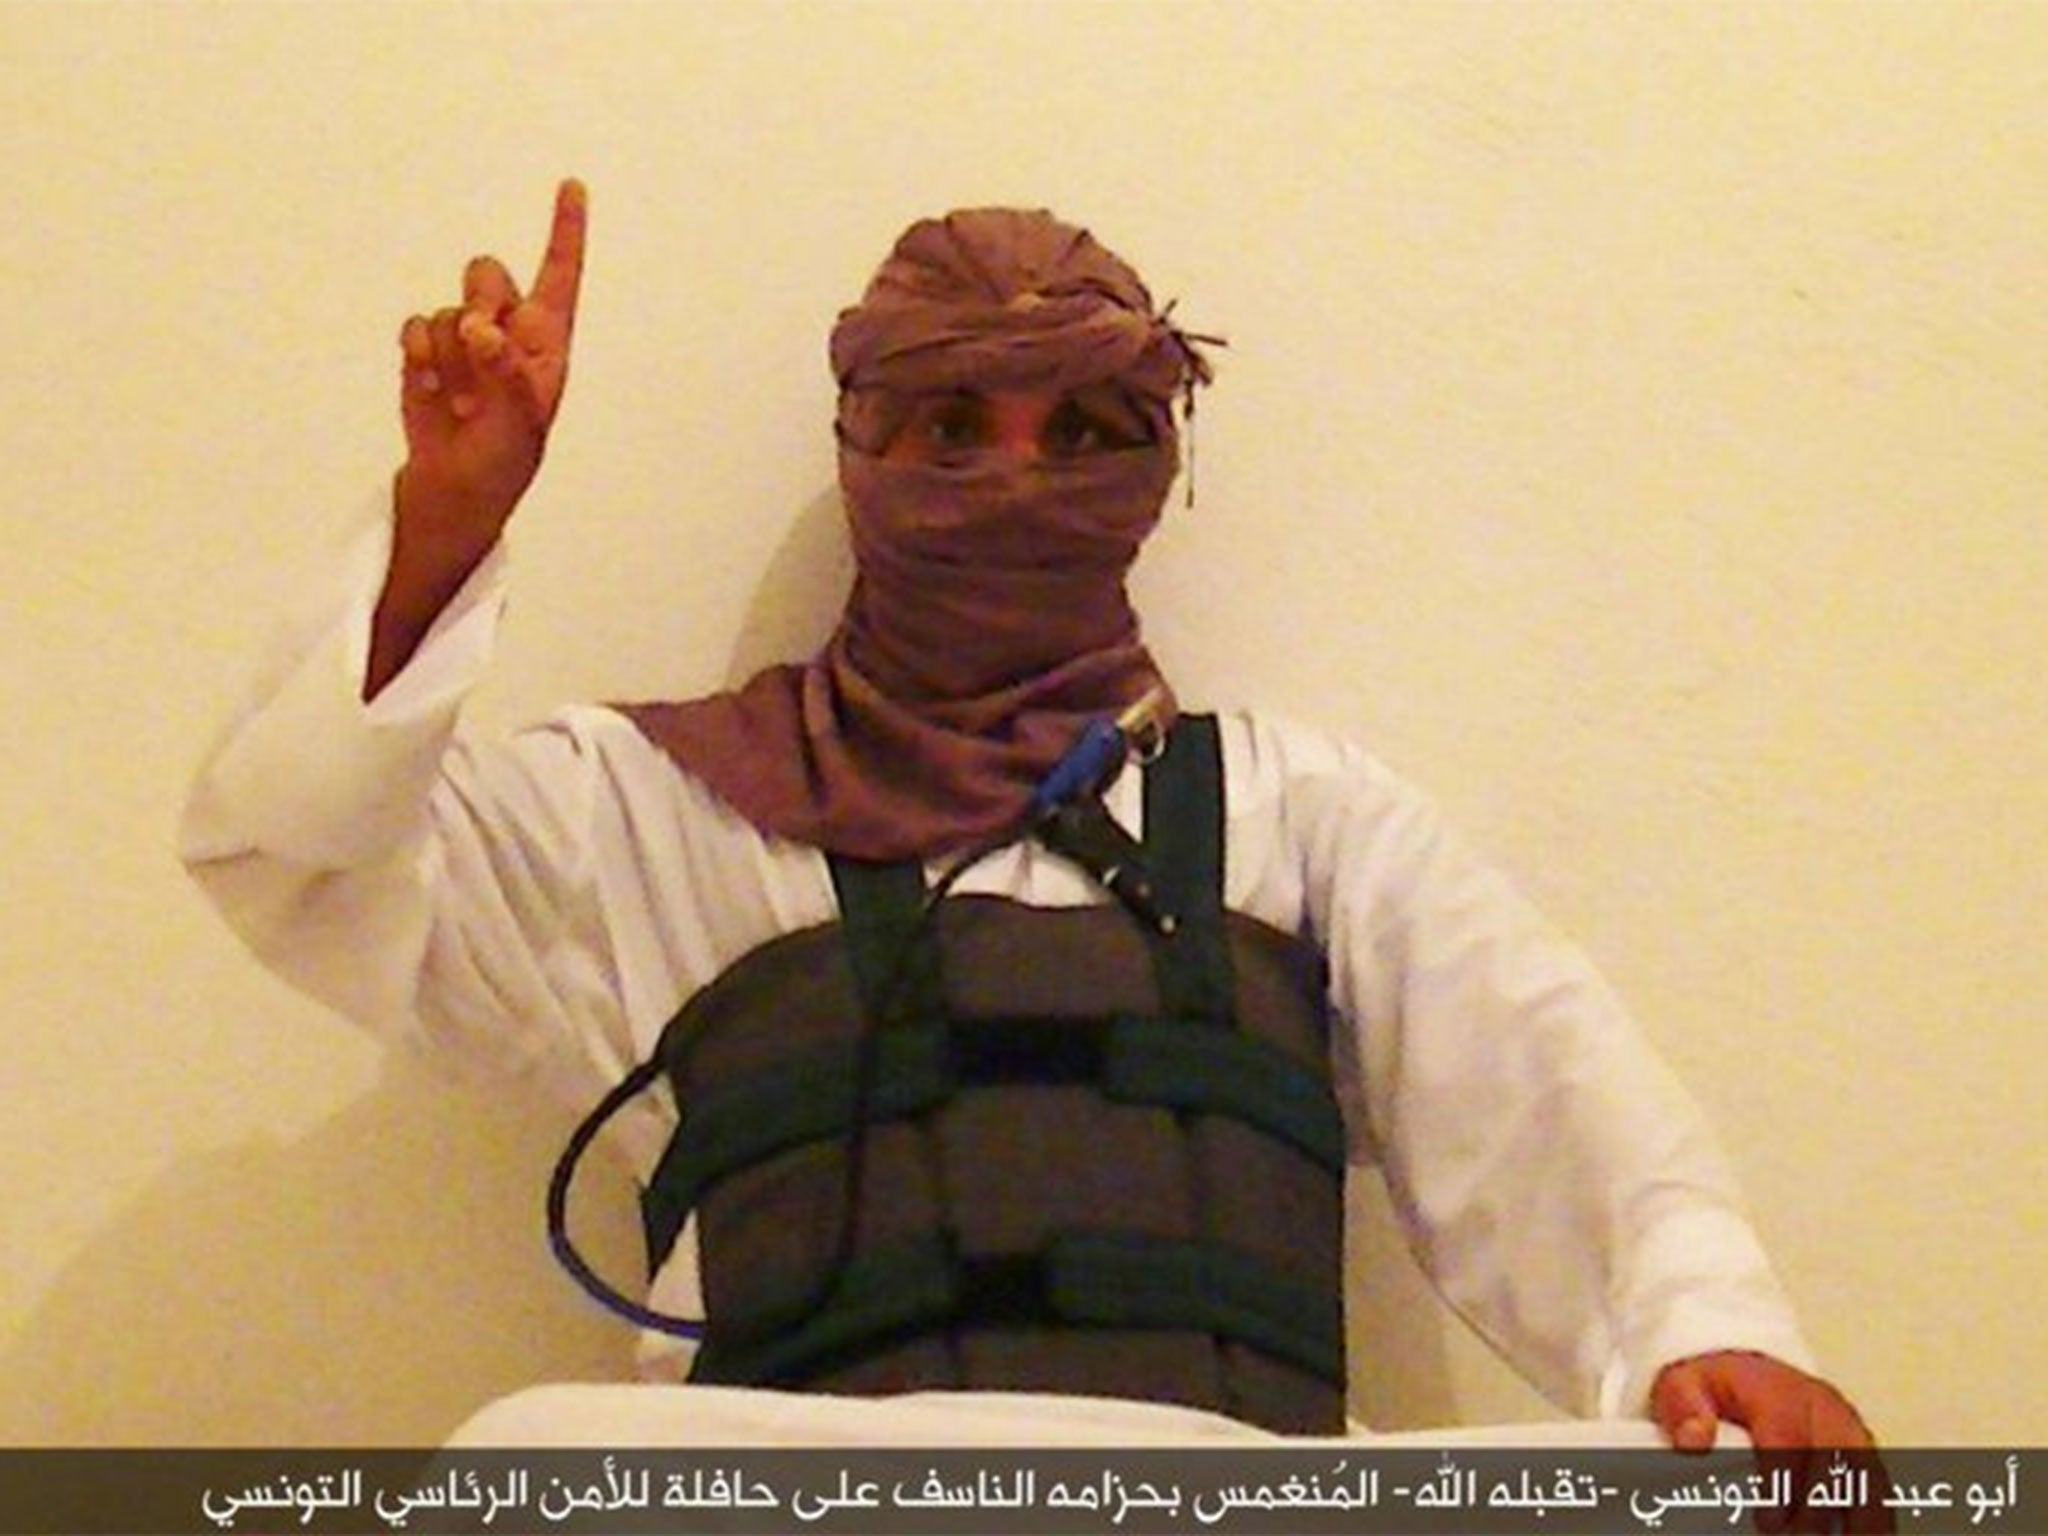 Isis releases an image purporting to show the Tunis suicide bomber